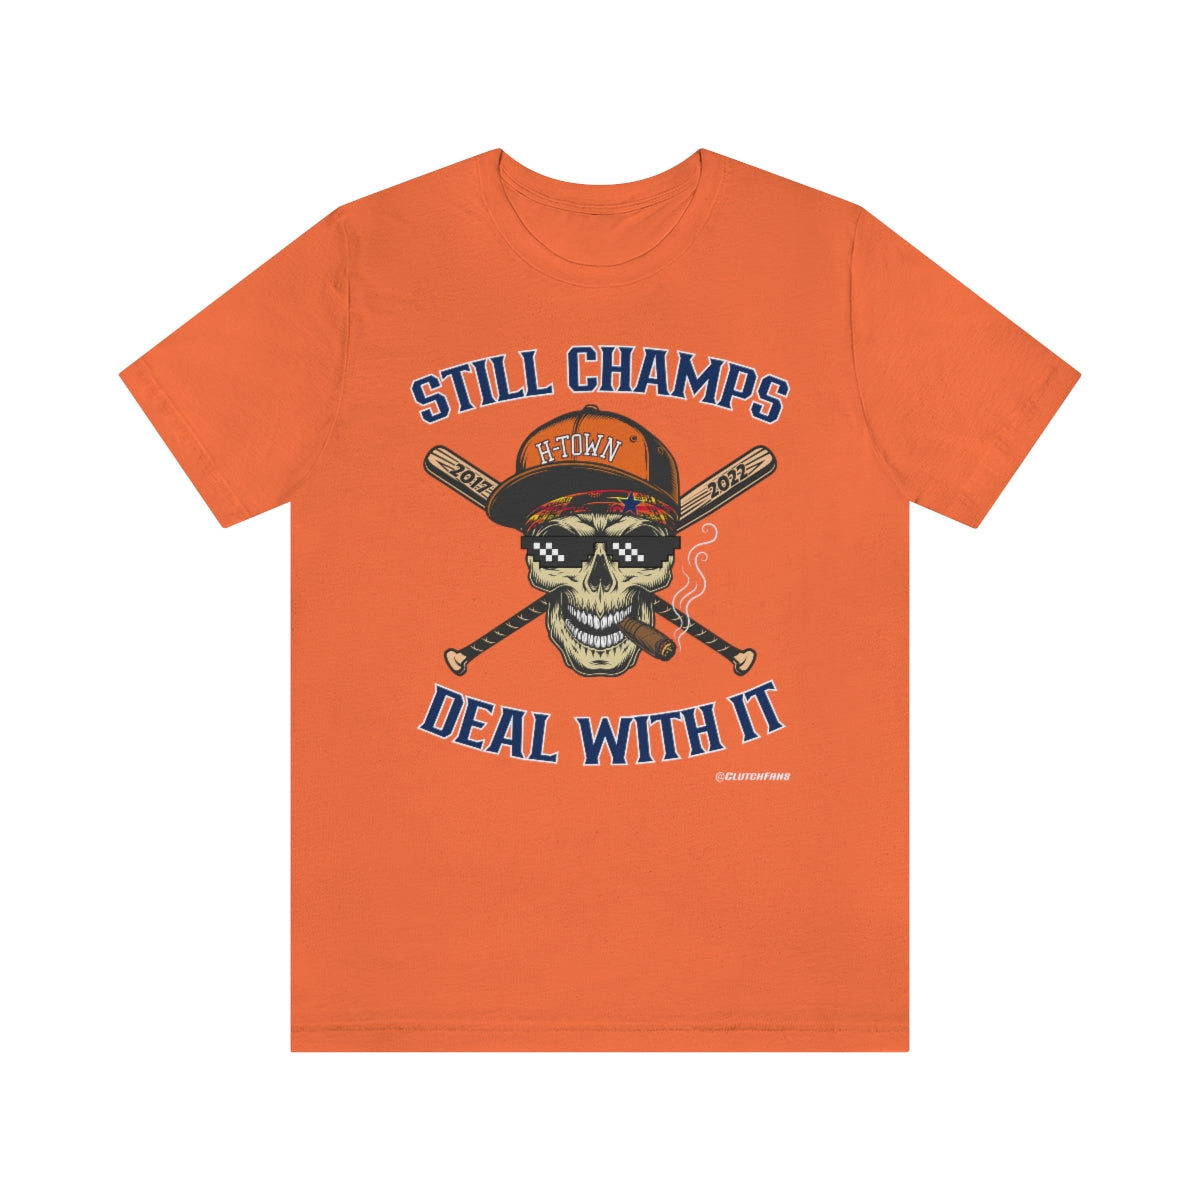 STILL CHAMPS: Deal With It!